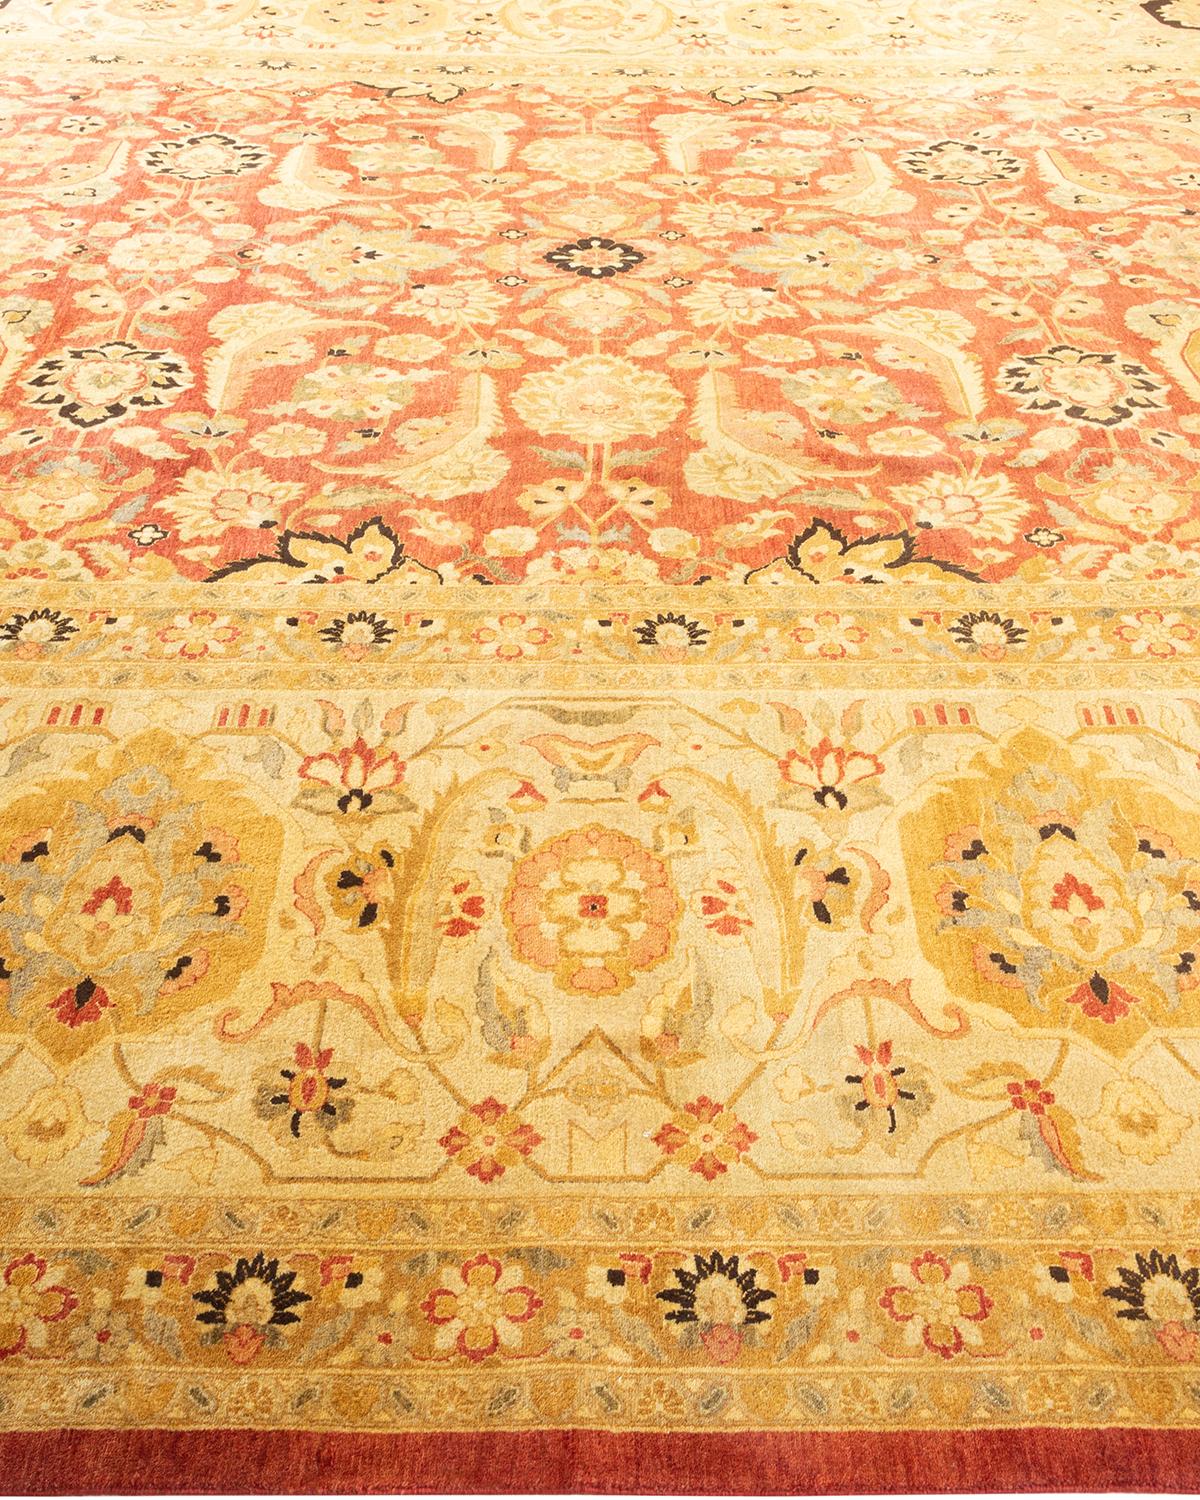 Mogul, One-of-a-Kind Hand-Knotted Area Rug, Orange In New Condition For Sale In Norwalk, CT